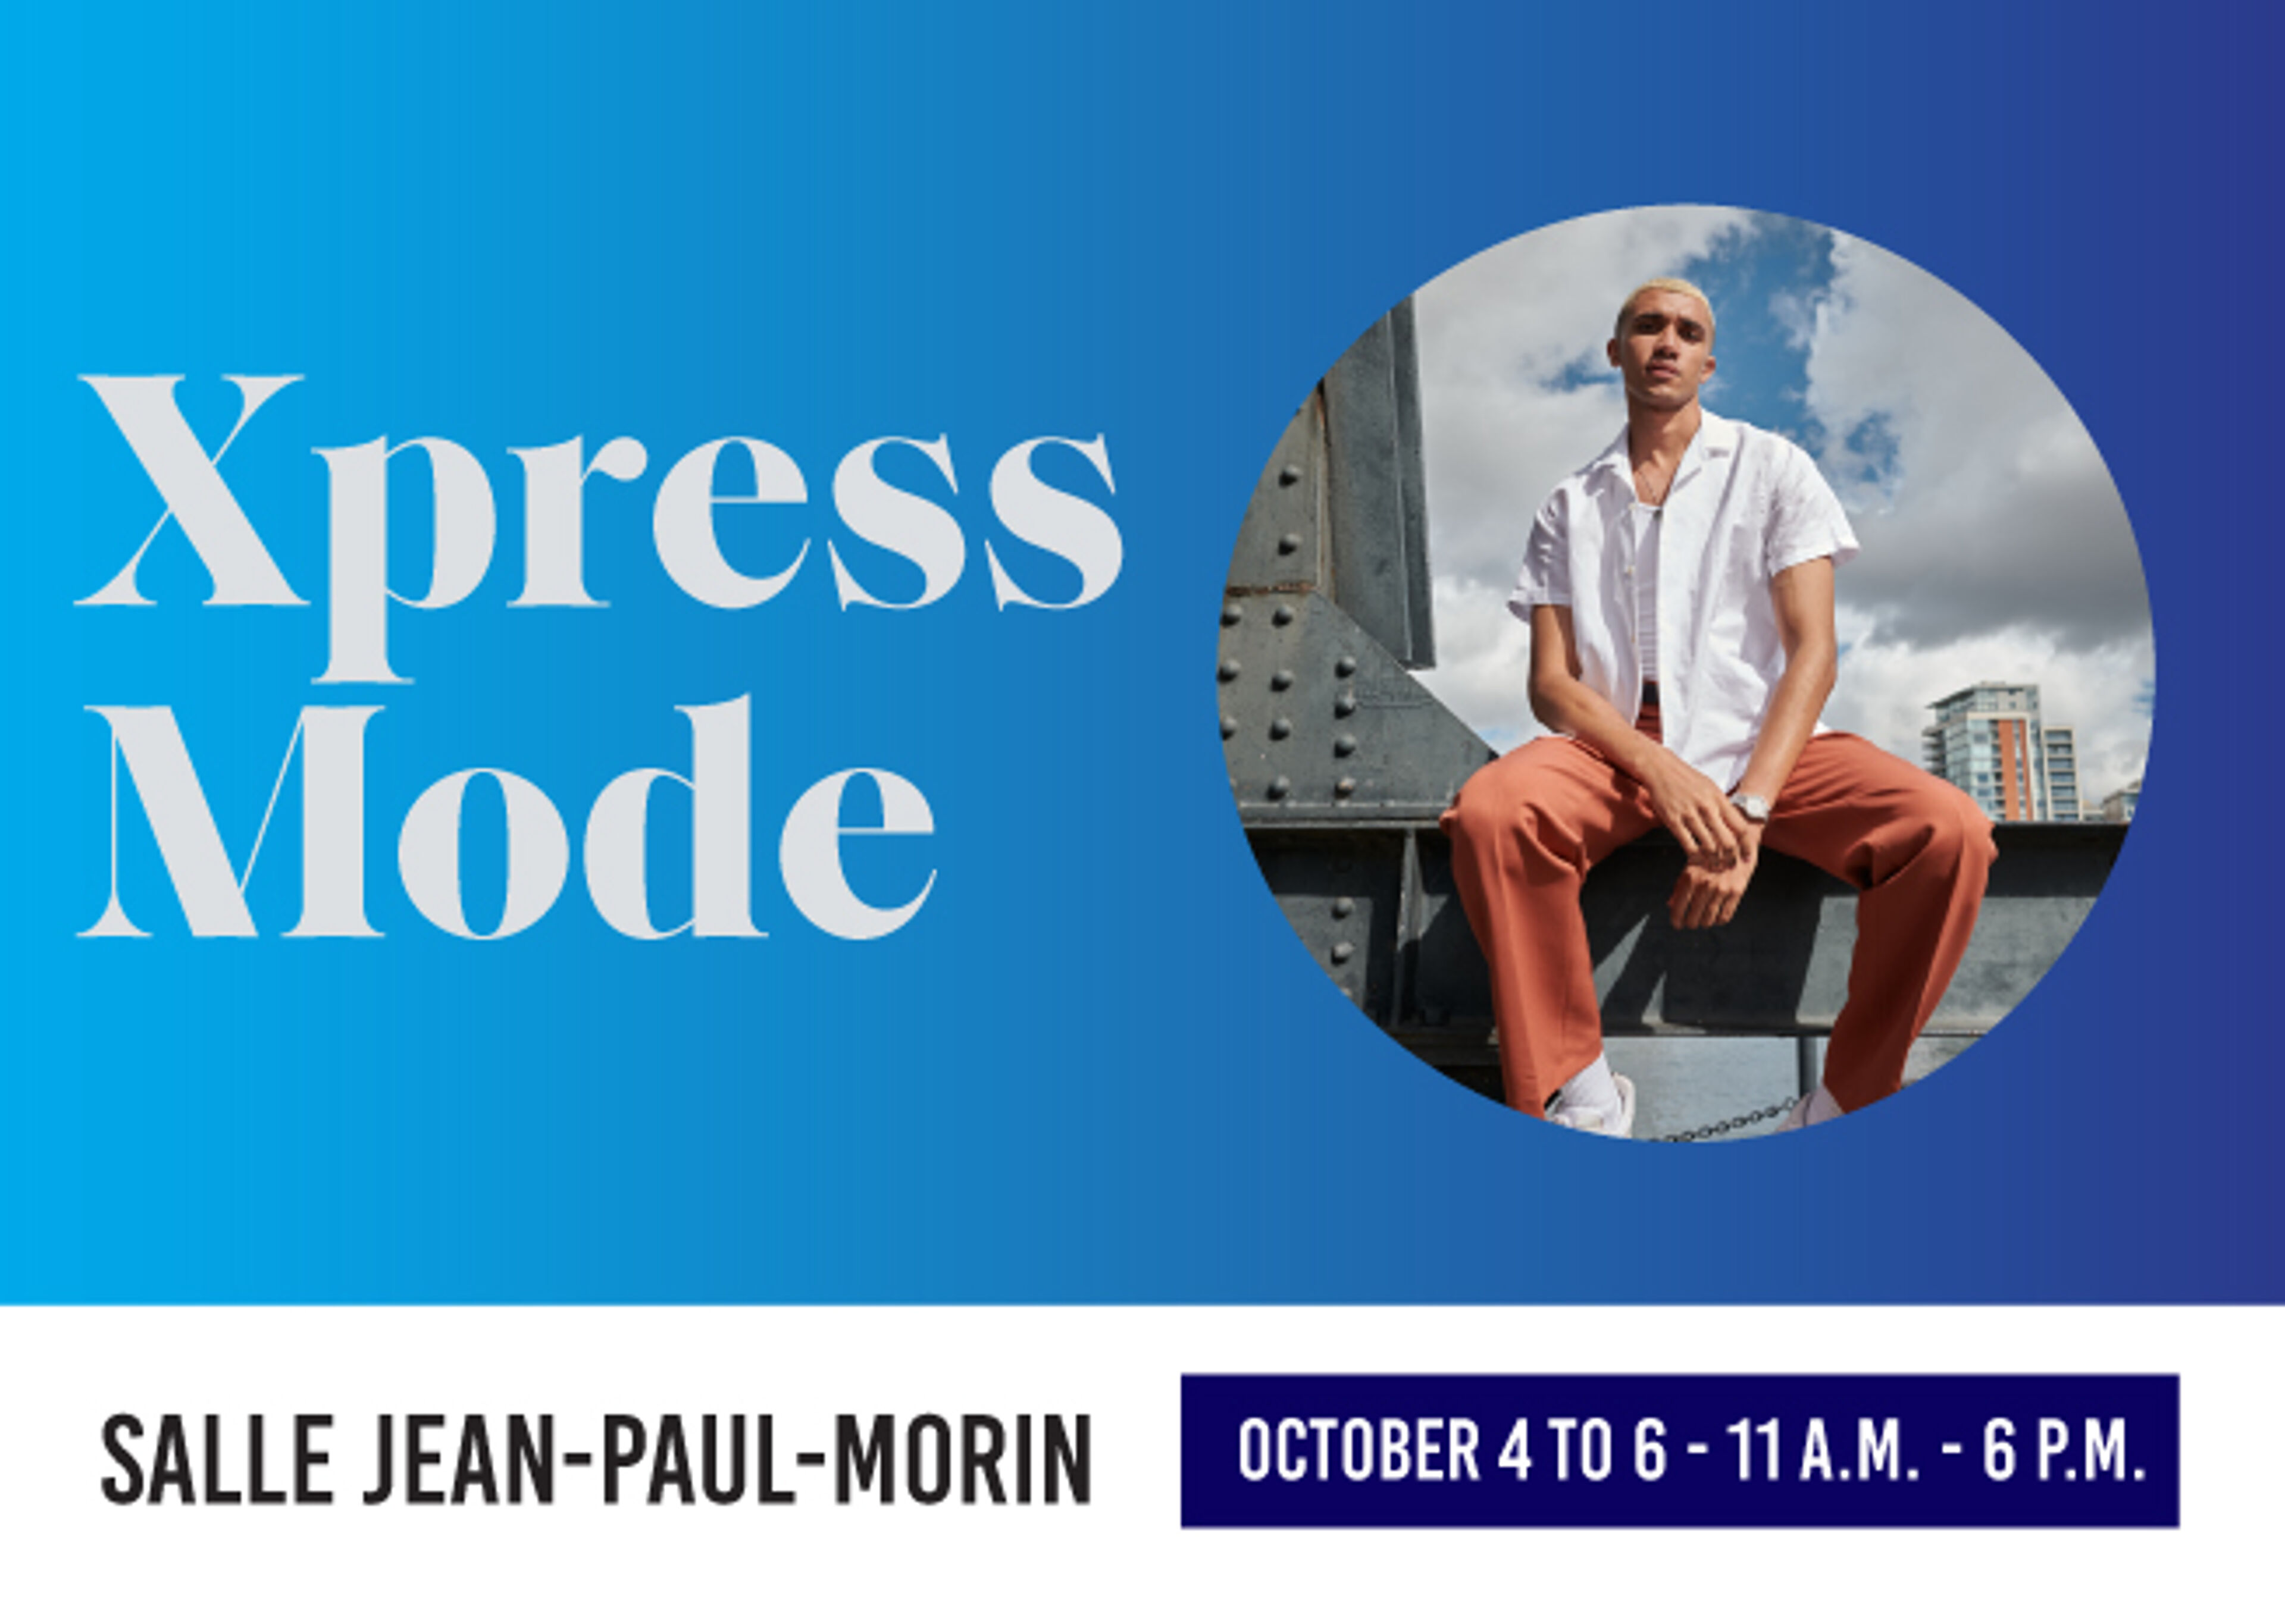  Flyer for "Xpress Mode" fashion event at Salle Jean-Paul-Morin, from October 4 to 6, featuring a stylish man.

